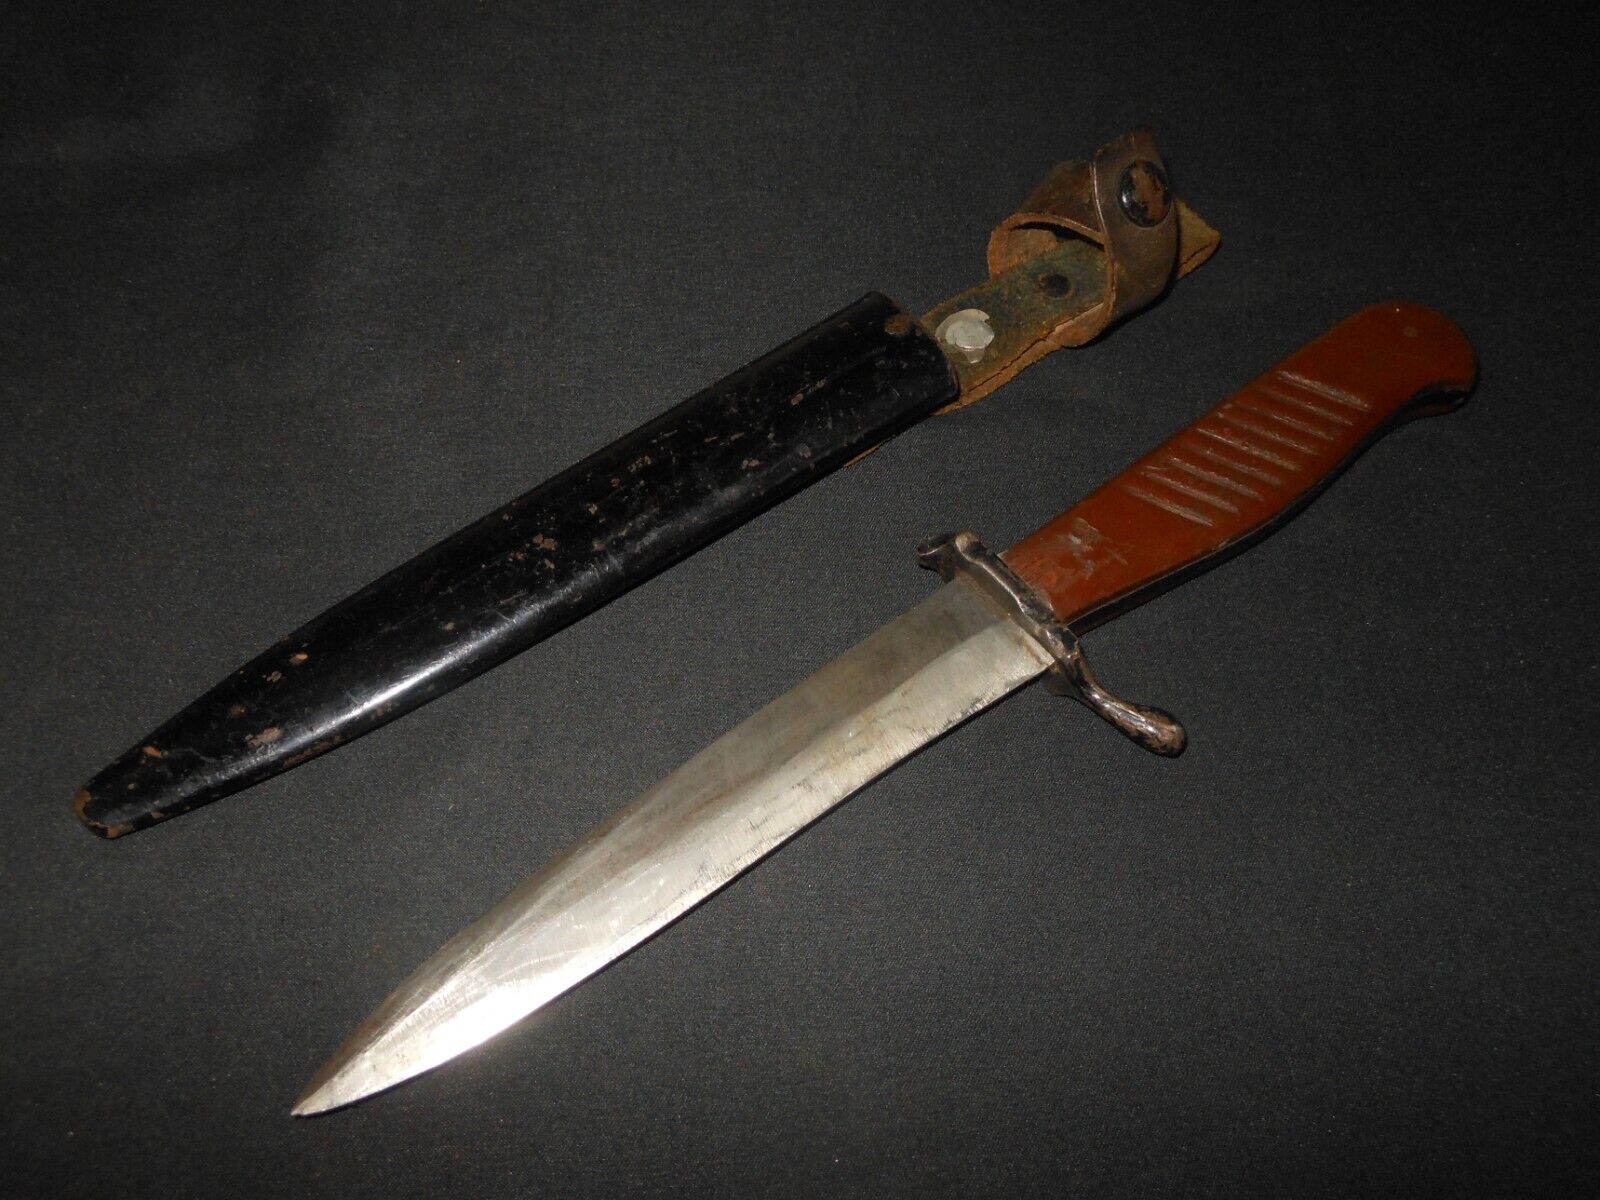 https://axis-militaria.com/wp-content/uploads/imported/2/WW1-Imperial-German-Army-Nahkampfmesser-COMBAT-TRENCH-KNIFE-NICE-235280896902.jpg